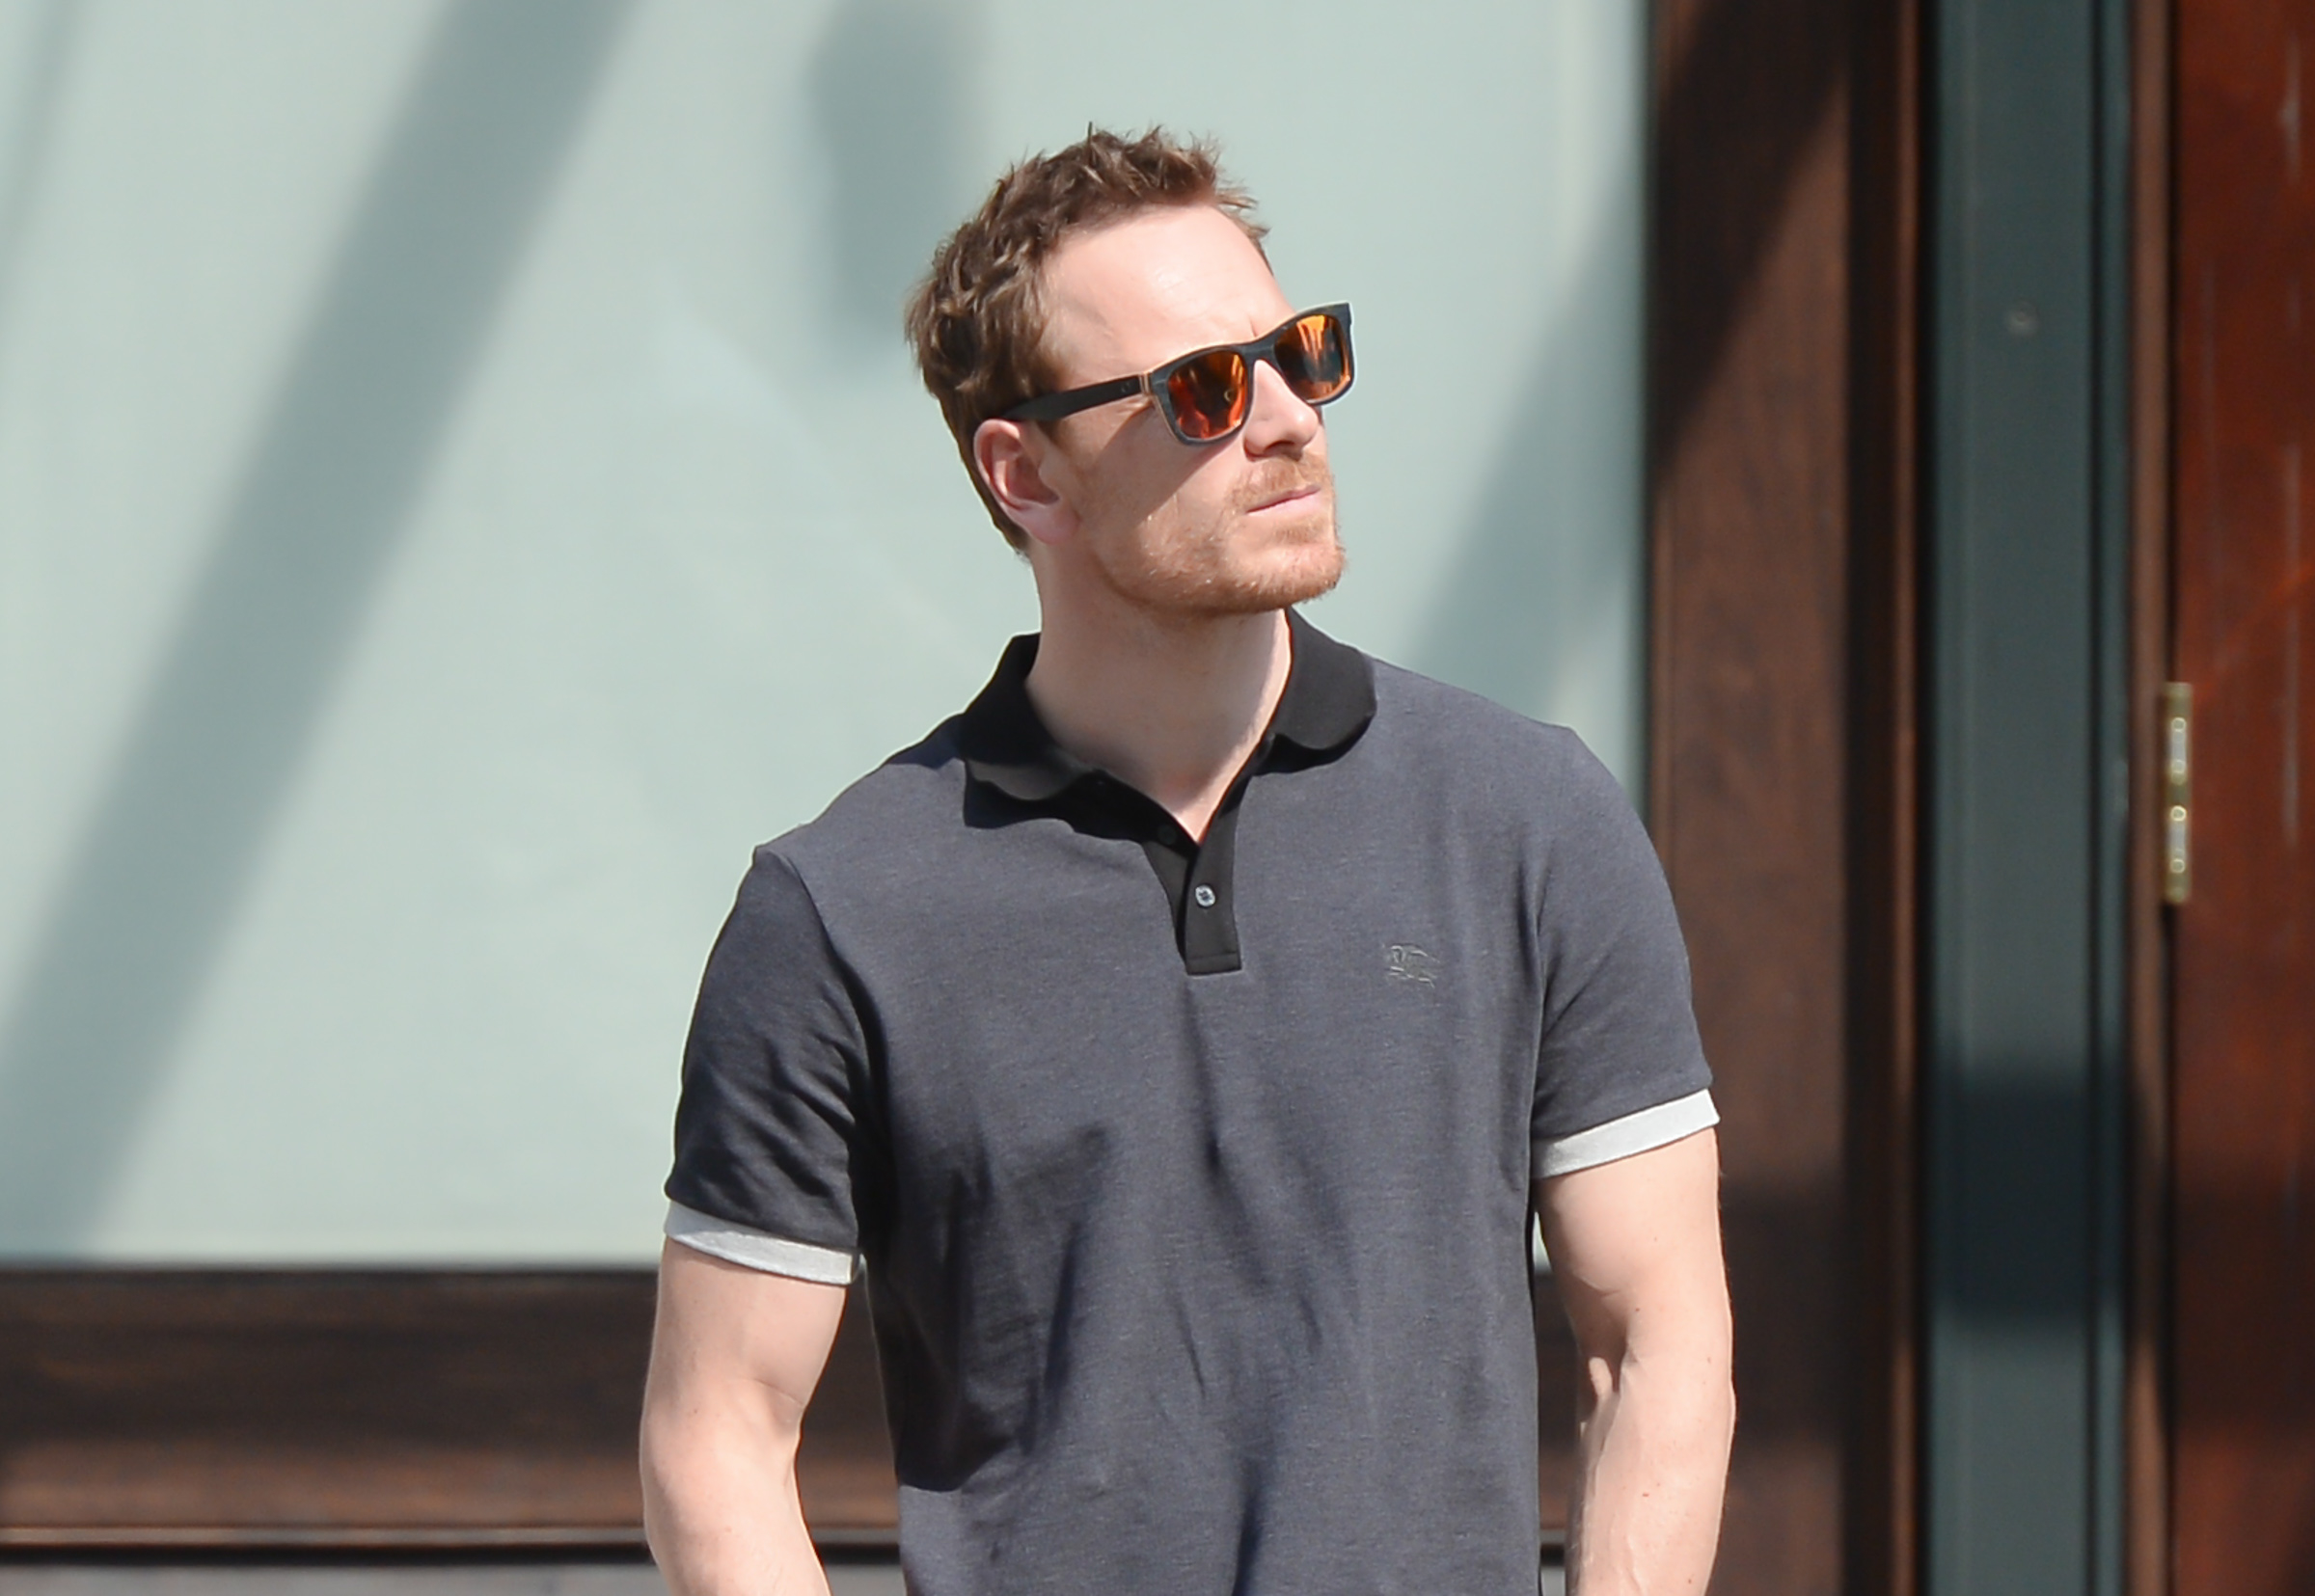 Close-up of Michael wearing sunglasses and a short-sleeved shirt